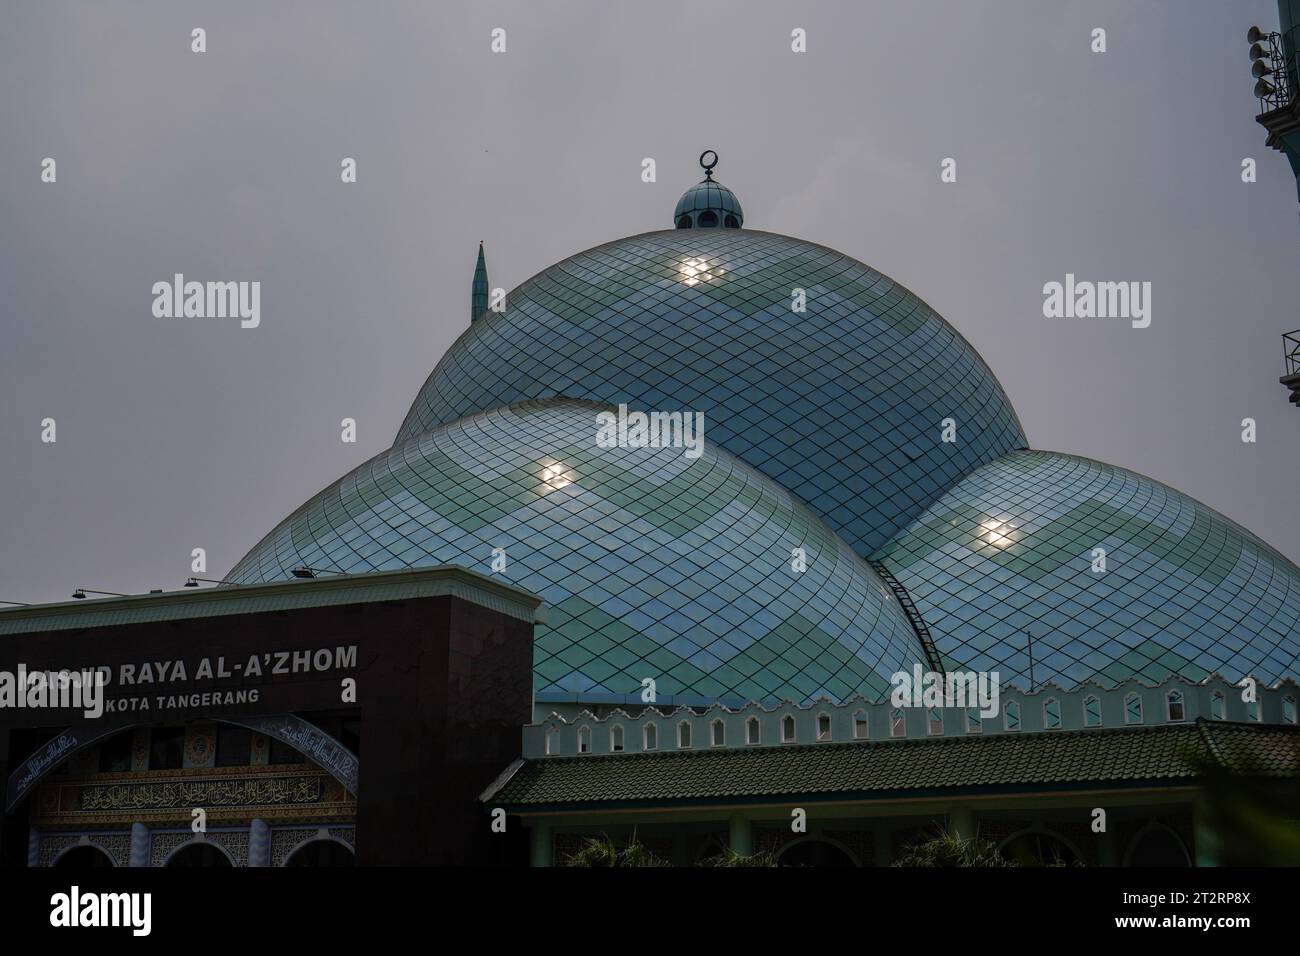 Indonesian. The mosque is the place where Muslims worship, located from the side with a view towards the sky. Stock Photo